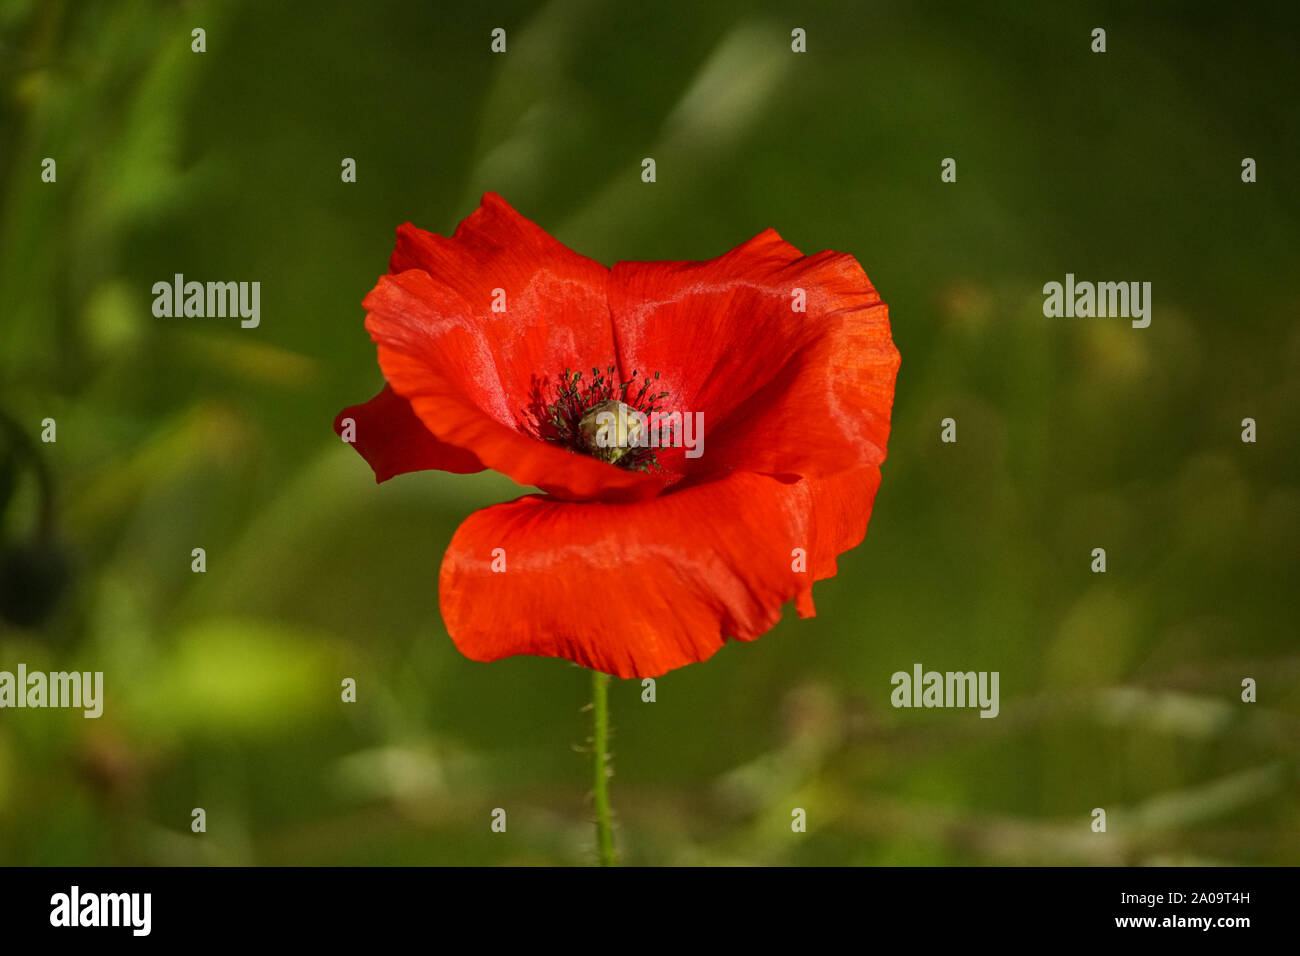 Colourful Wildflower, Colourful Wildflower, Green Background, Red Poppy, Flower in Bloom, Papaver Rhoeas Stock Photo